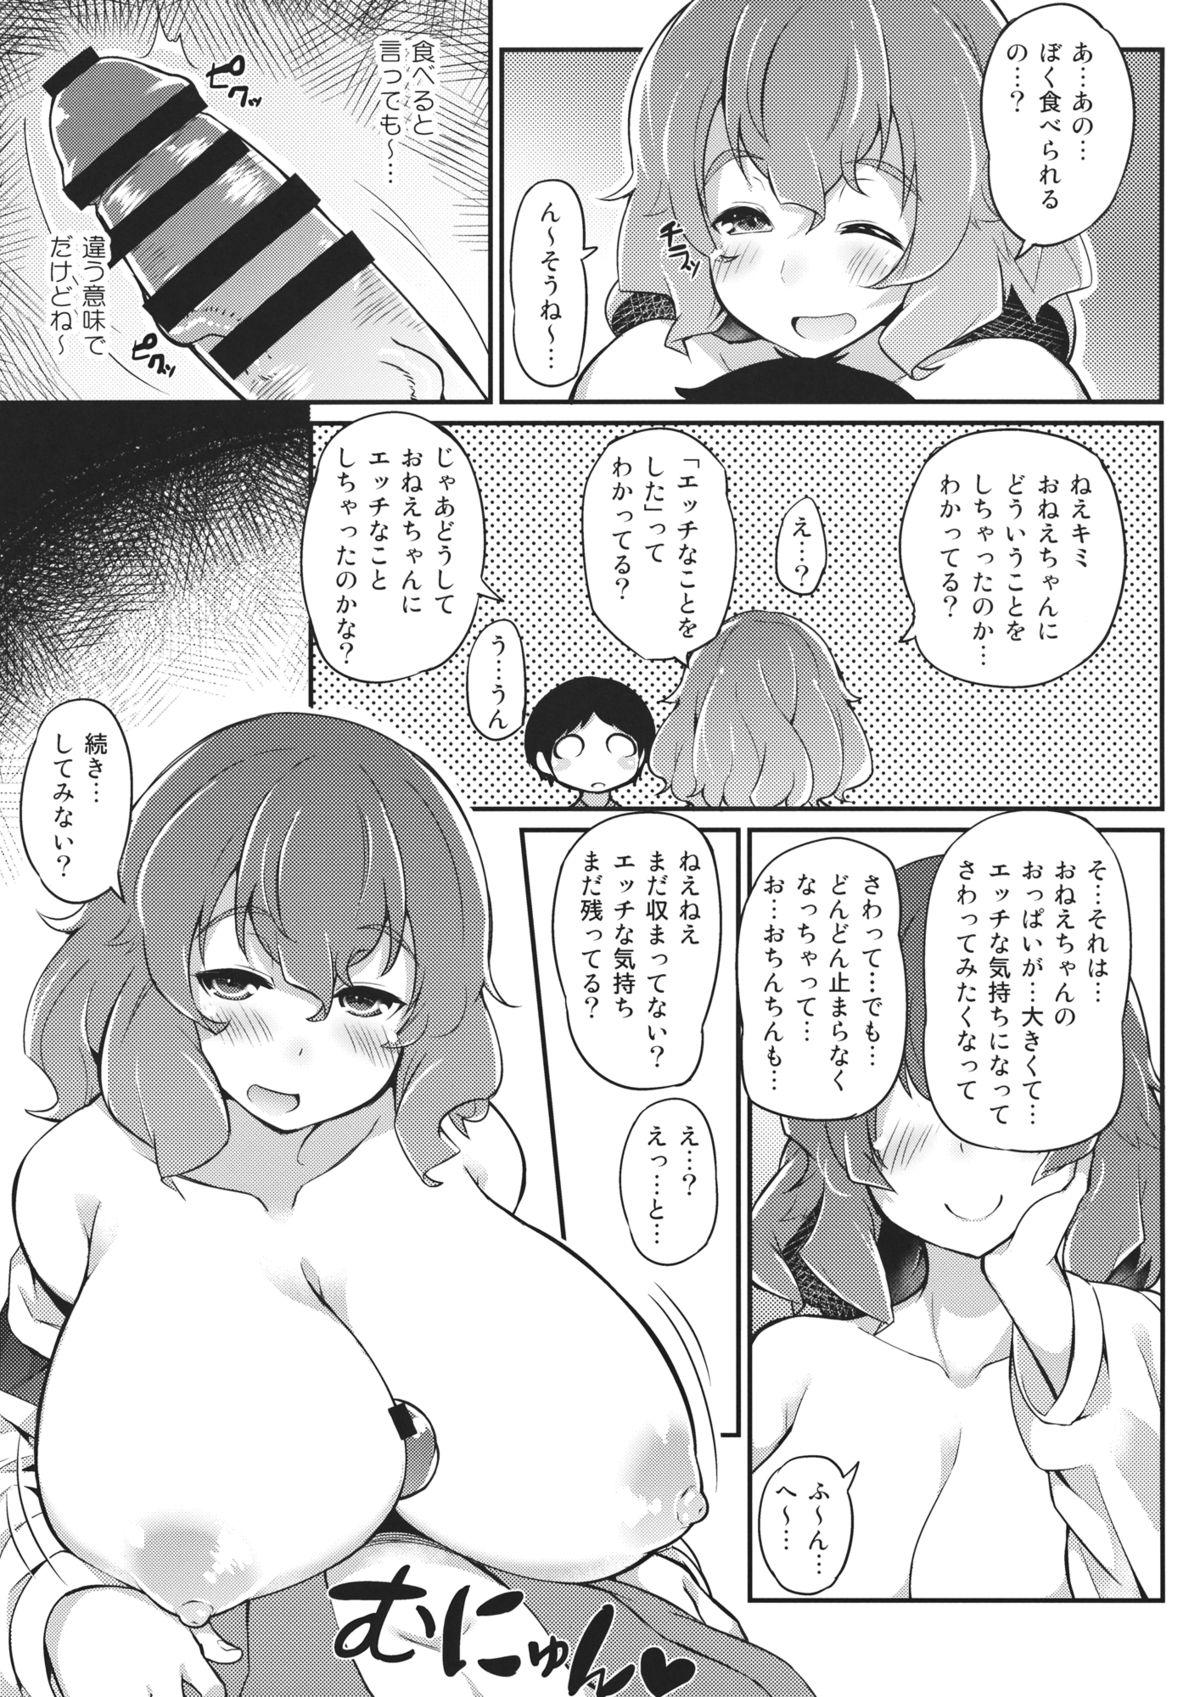 Big Boobs xLetty VxV - Touhou project 4some - Page 10